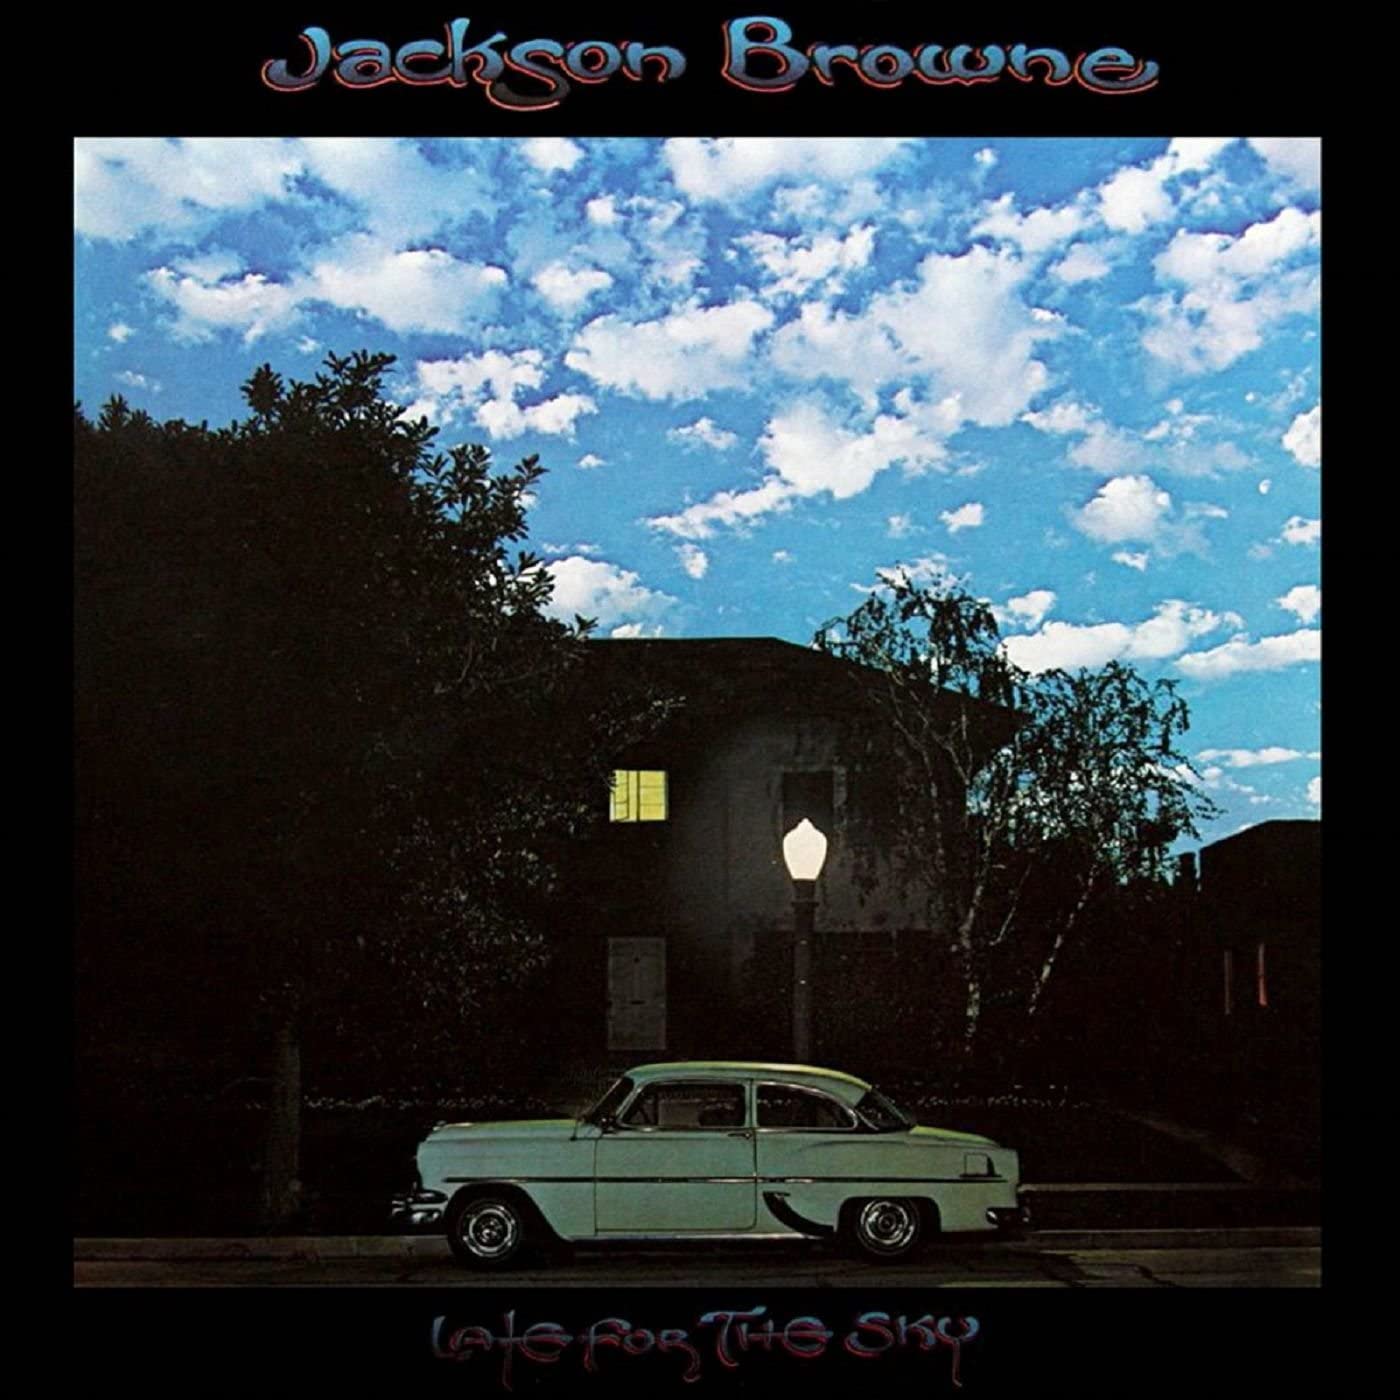 Jackson Browne - Late for the sky (Used) (Mint Condition)